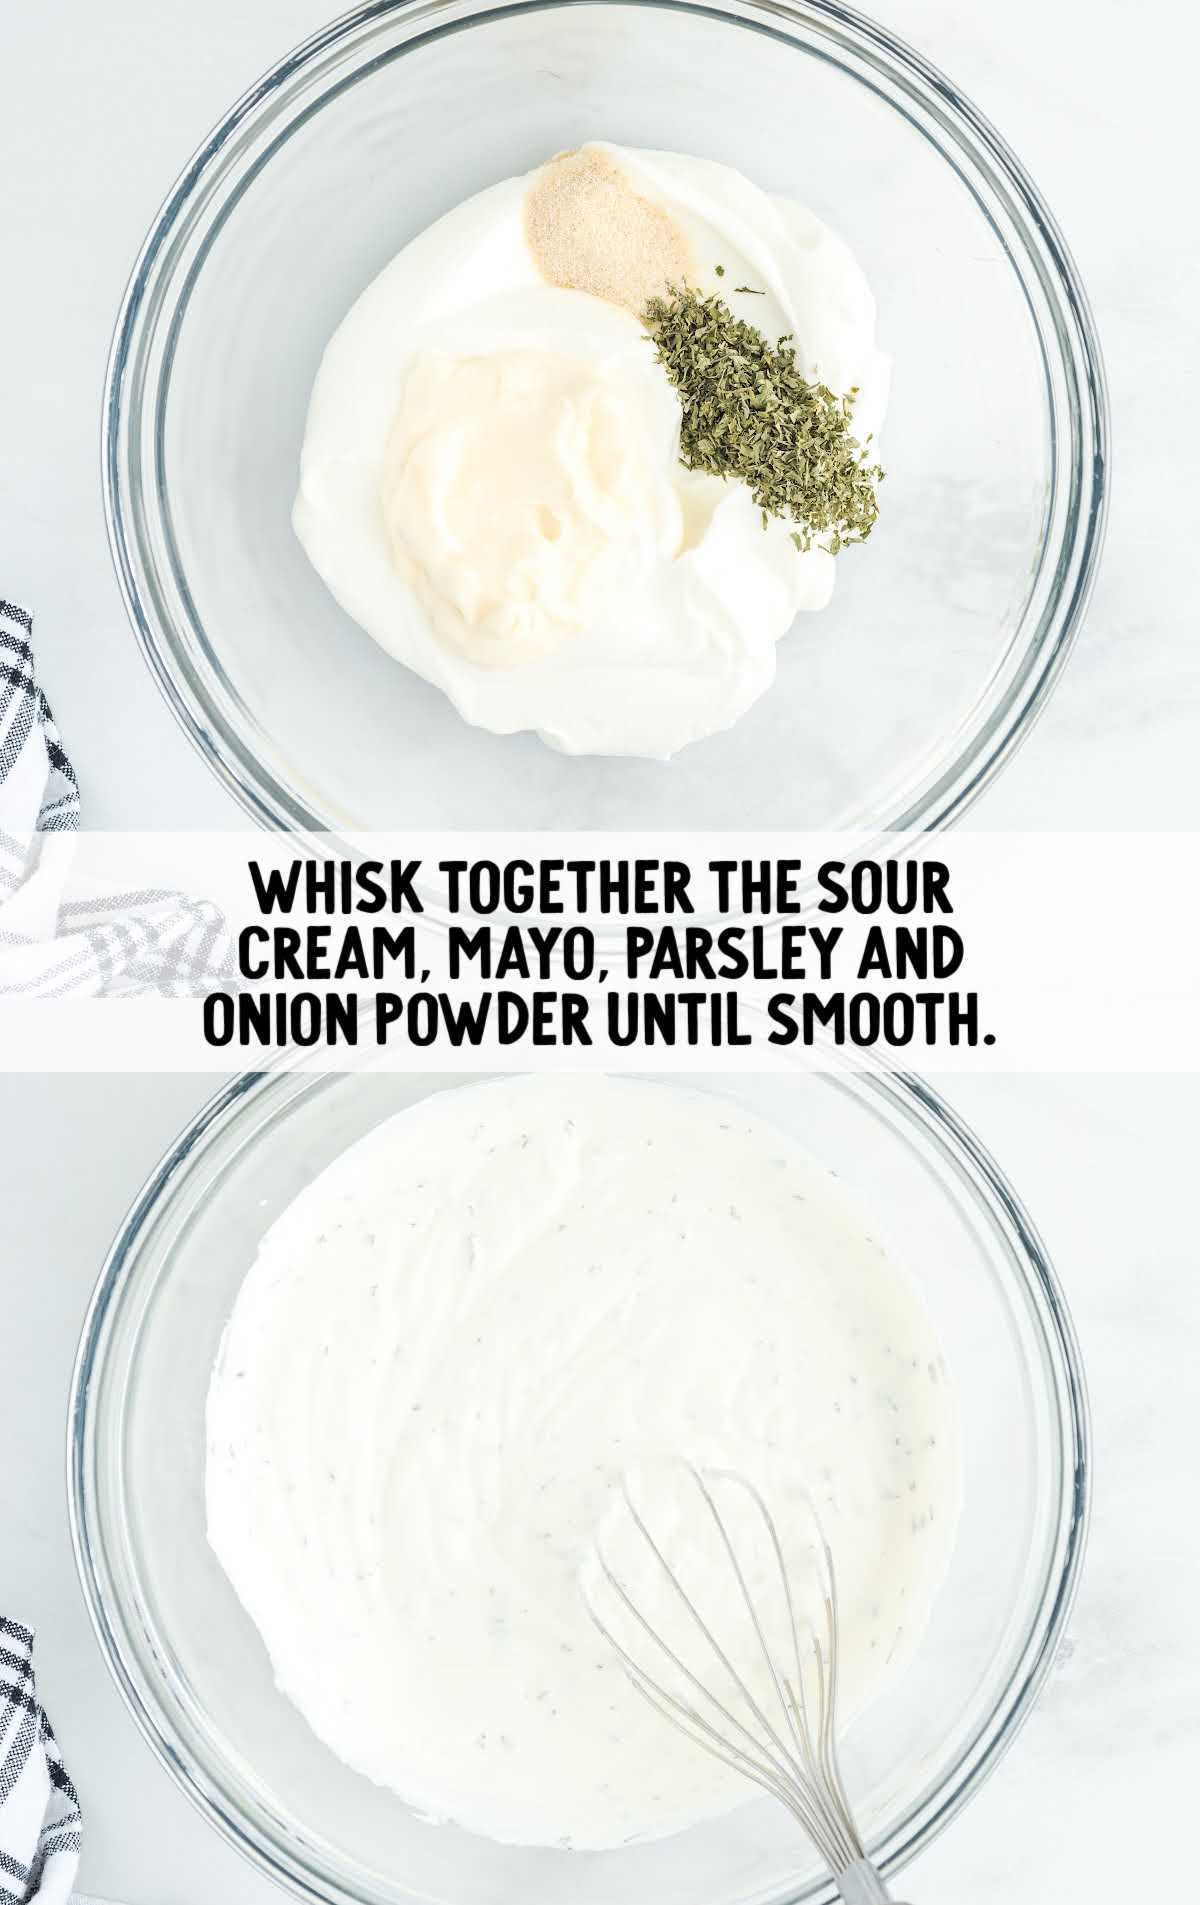 sour cream, mayo, parsley and onions whisked in a bowl